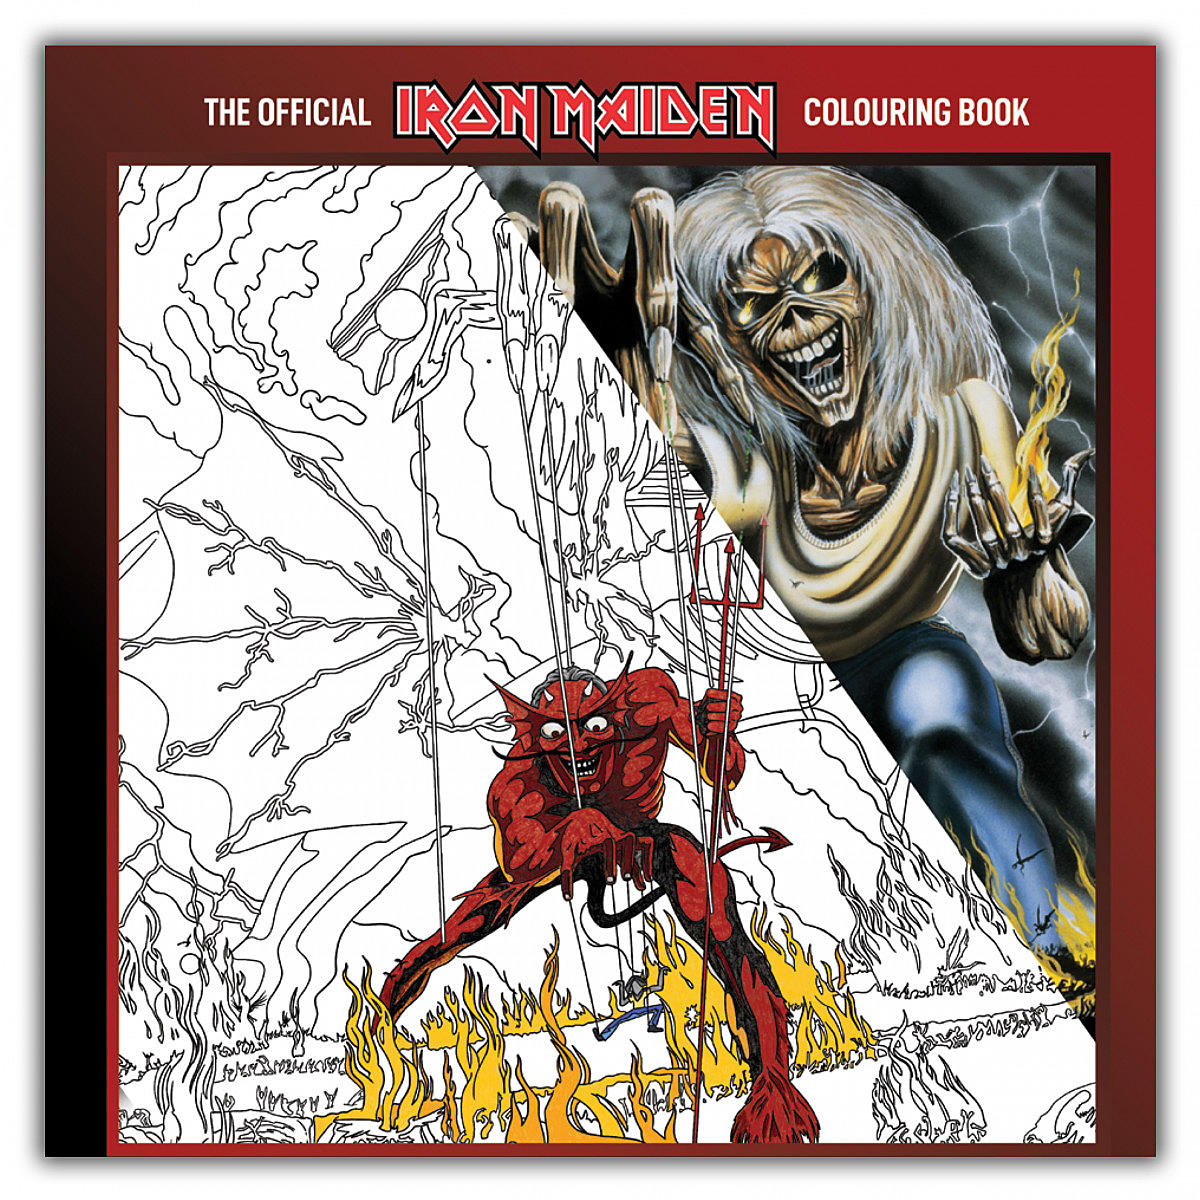 The Official Iron Maiden Coloring Book Is Coming This Christmas